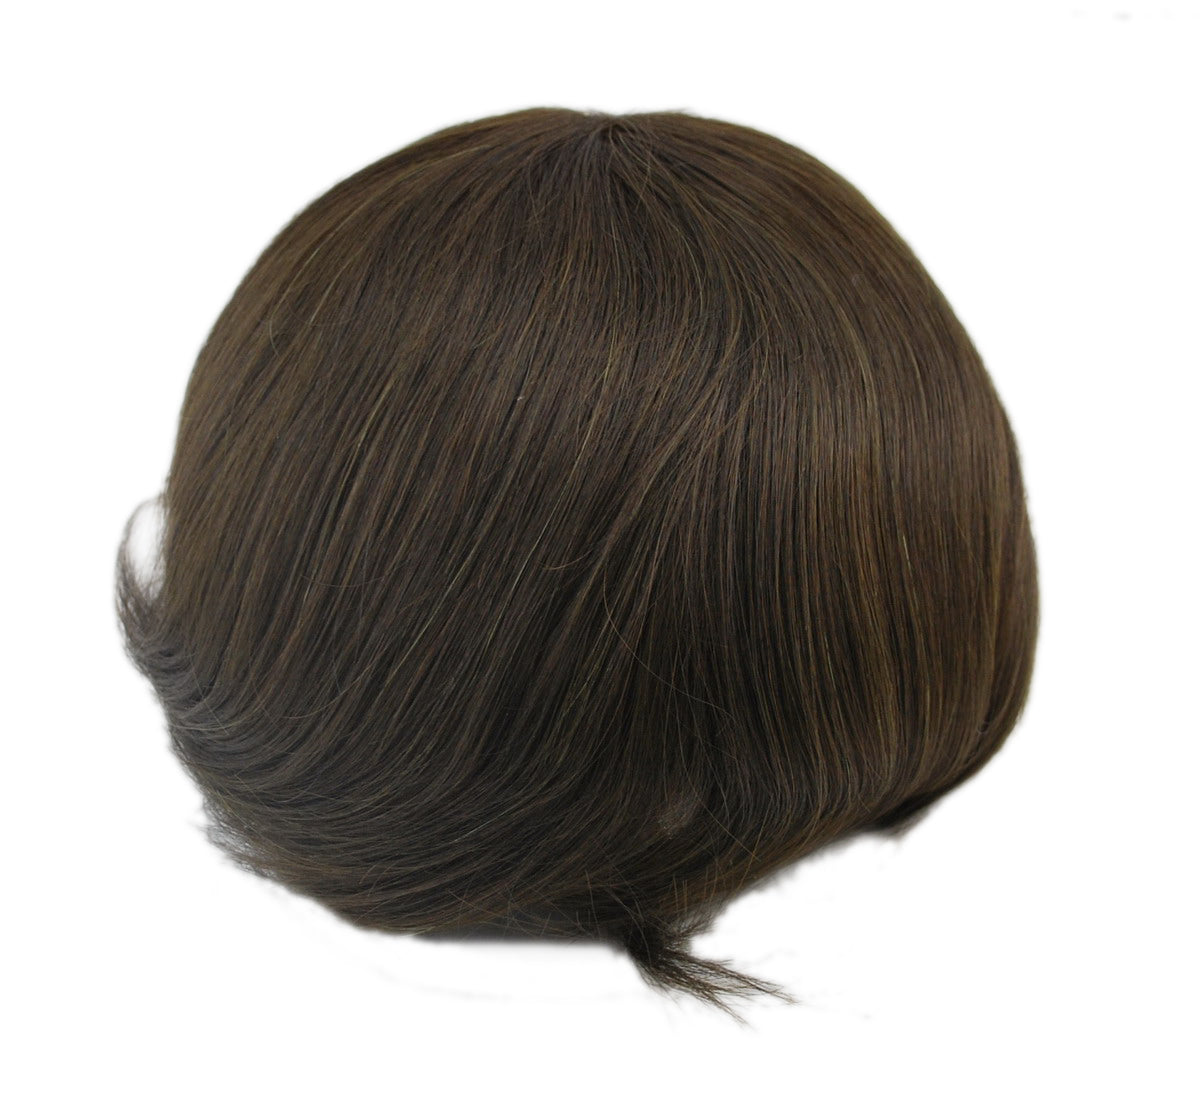 mens hair systems #3 ash brown prosthesis for men French lace with PU back and sides men wig